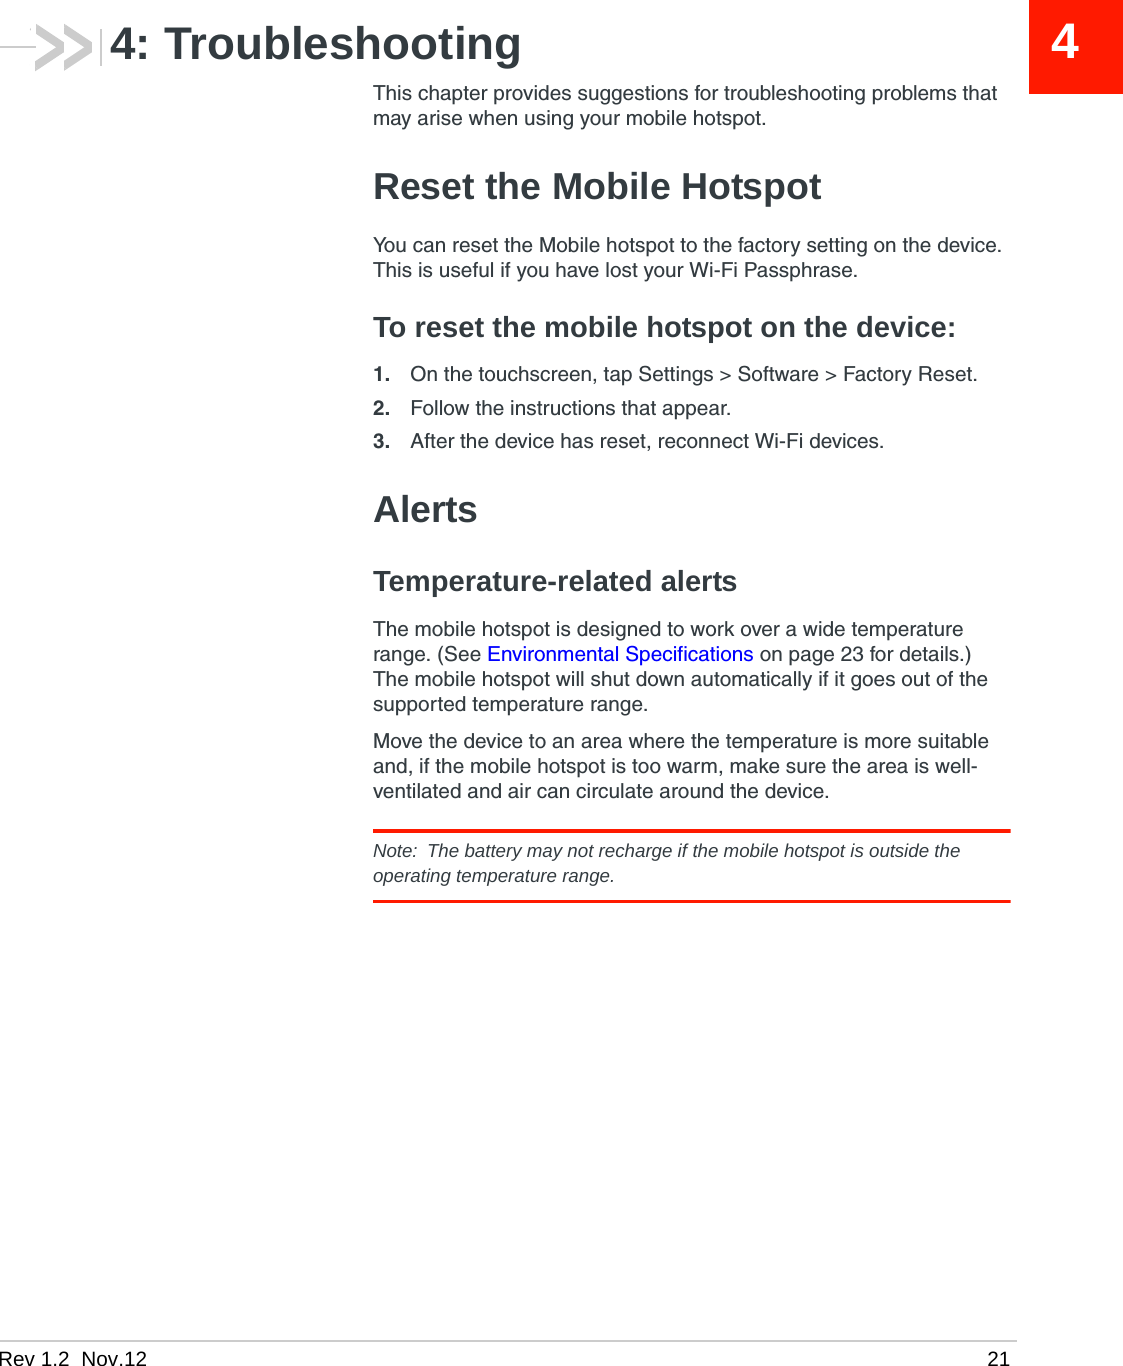 Rev 1.2  Nov.12   2144: TroubleshootingThis chapter provides suggestions for troubleshooting problems that may arise when using your mobile hotspot.Reset the Mobile HotspotYou can reset the Mobile hotspot to the factory setting on the device. This is useful if you have lost your Wi-Fi Passphrase.To reset the mobile hotspot on the device:1. On the touchscreen, tap Settings &gt; Software &gt; Factory Reset.2. Follow the instructions that appear.3. After the device has reset, reconnect Wi-Fi devices.AlertsTemperature-related alertsThe mobile hotspot is designed to work over a wide temperature range. (See Environmental Specifications on page 23 for details.) The mobile hotspot will shut down automatically if it goes out of the supported temperature range. Move the device to an area where the temperature is more suitable and, if the mobile hotspot is too warm, make sure the area is well-ventilated and air can circulate around the device. Note:  The battery may not recharge if the mobile hotspot is outside the operating temperature range.